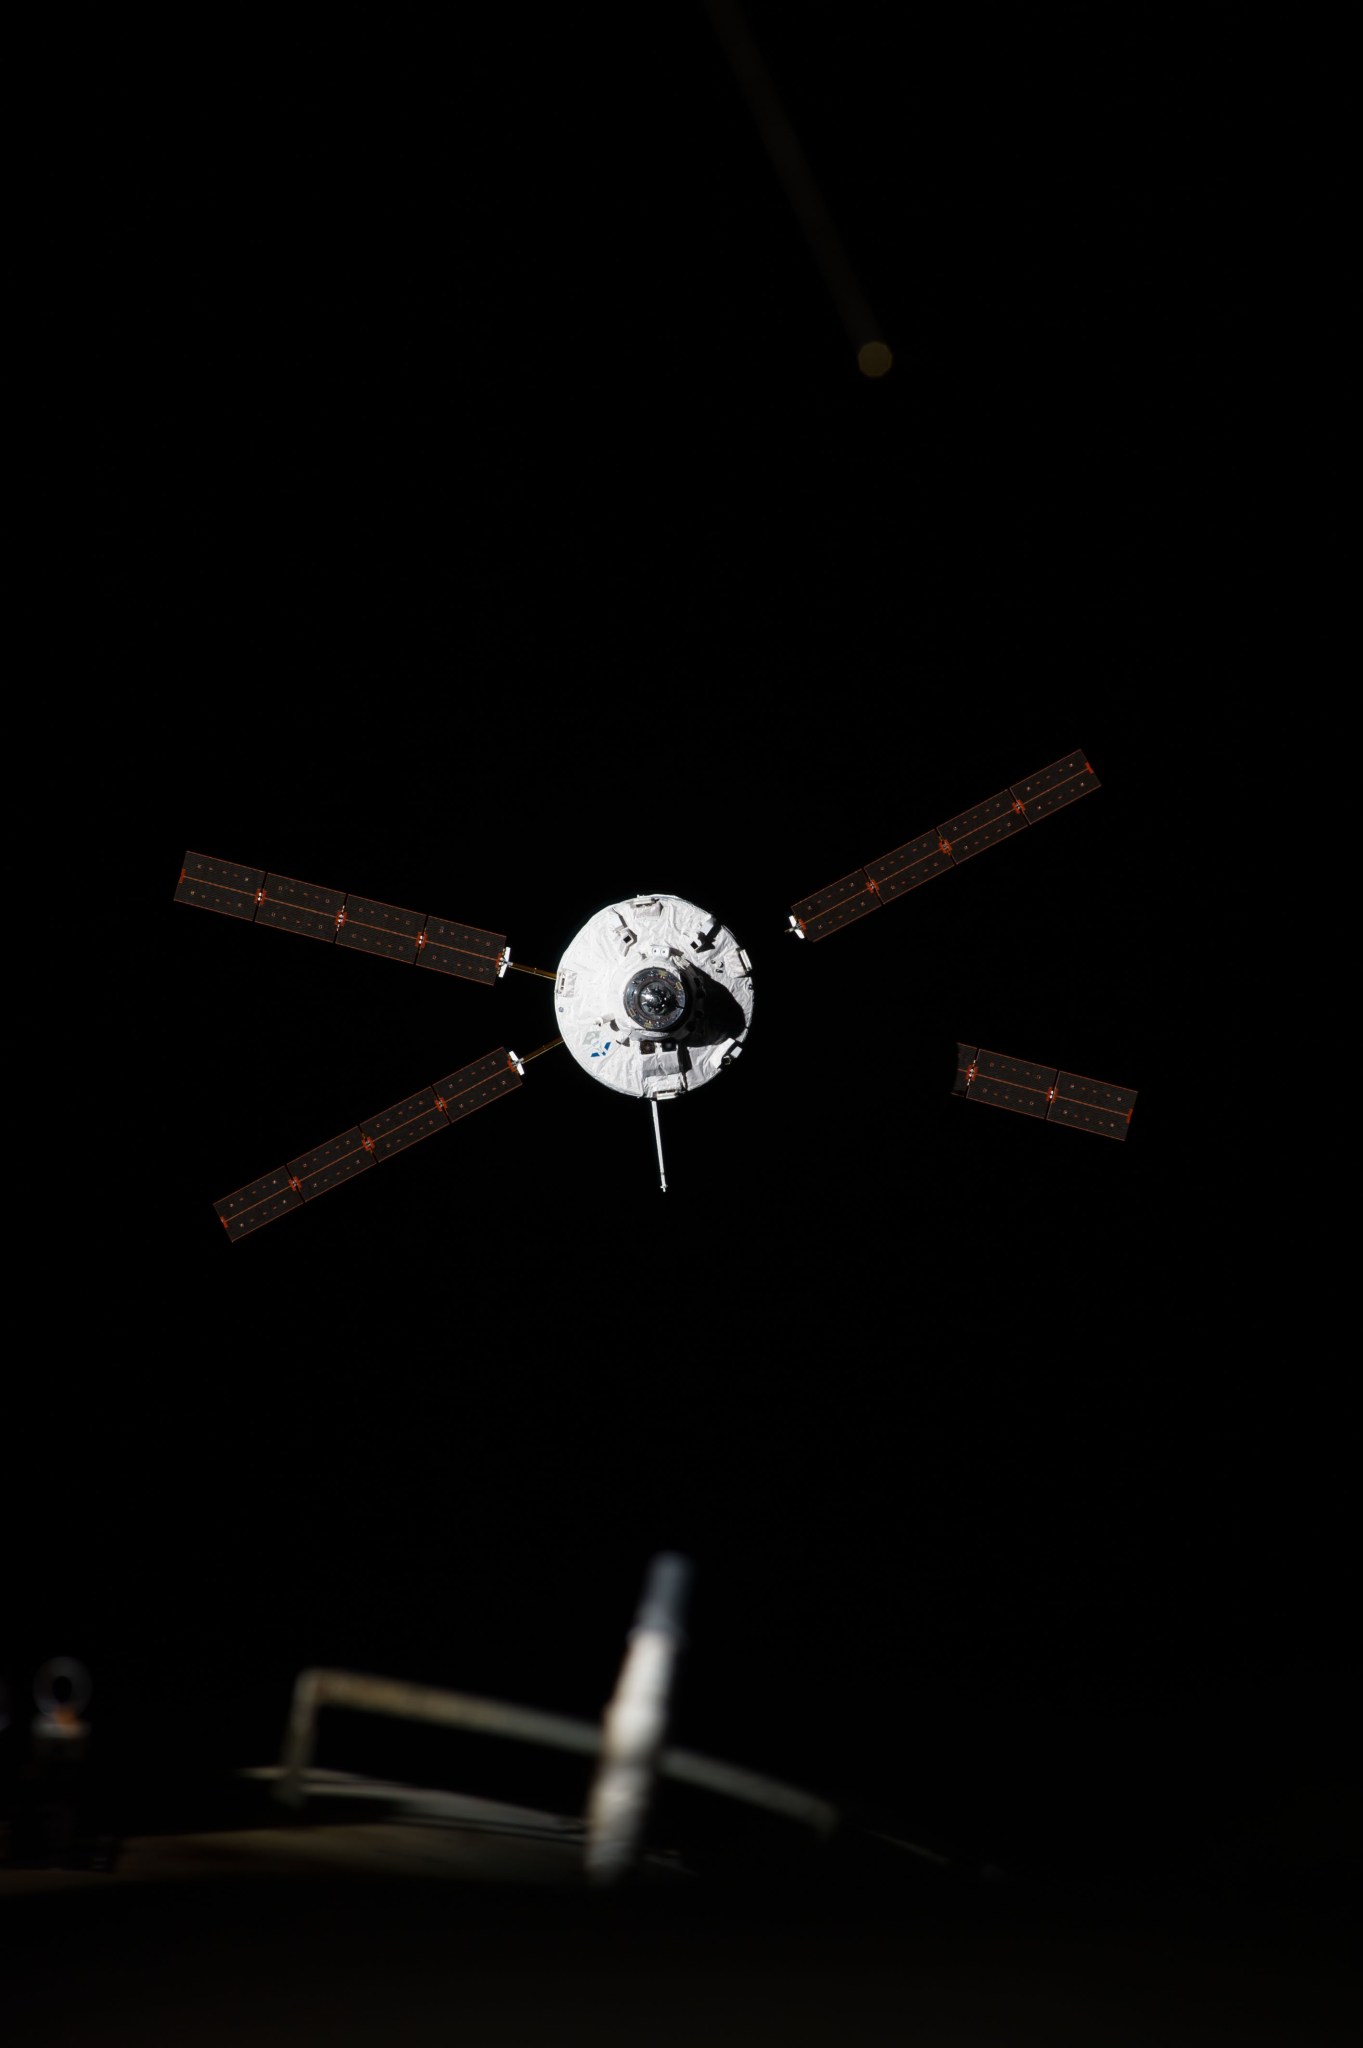 The "Georges Lemaitre" Automated Transfer Vehicle (ATV-5), photographed by an Expedition 40 crew member, approaches the aft port of the International Space Station's Zvezda Service Module. Docking occurred at 8:30 a.m. (CDT) as the ATV and the station flew 260 miles over southern Kazakhstan, following a two-week period of free-flight.